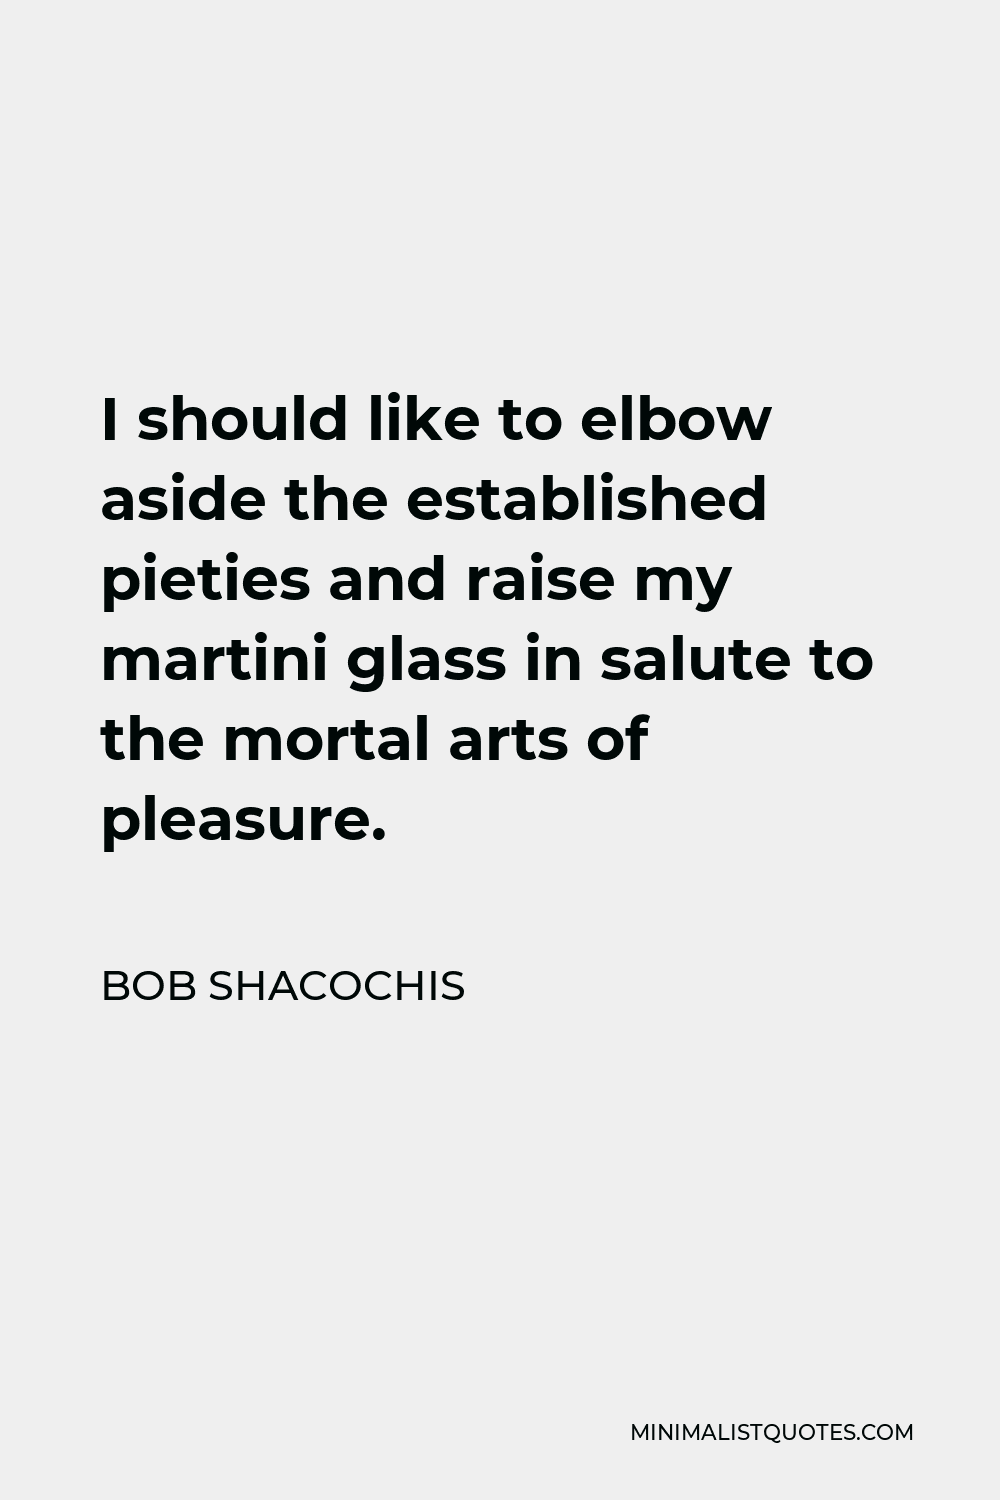 Bob Shacochis Quote - I should like to elbow aside the established pieties and raise my martini glass in salute to the mortal arts of pleasure.